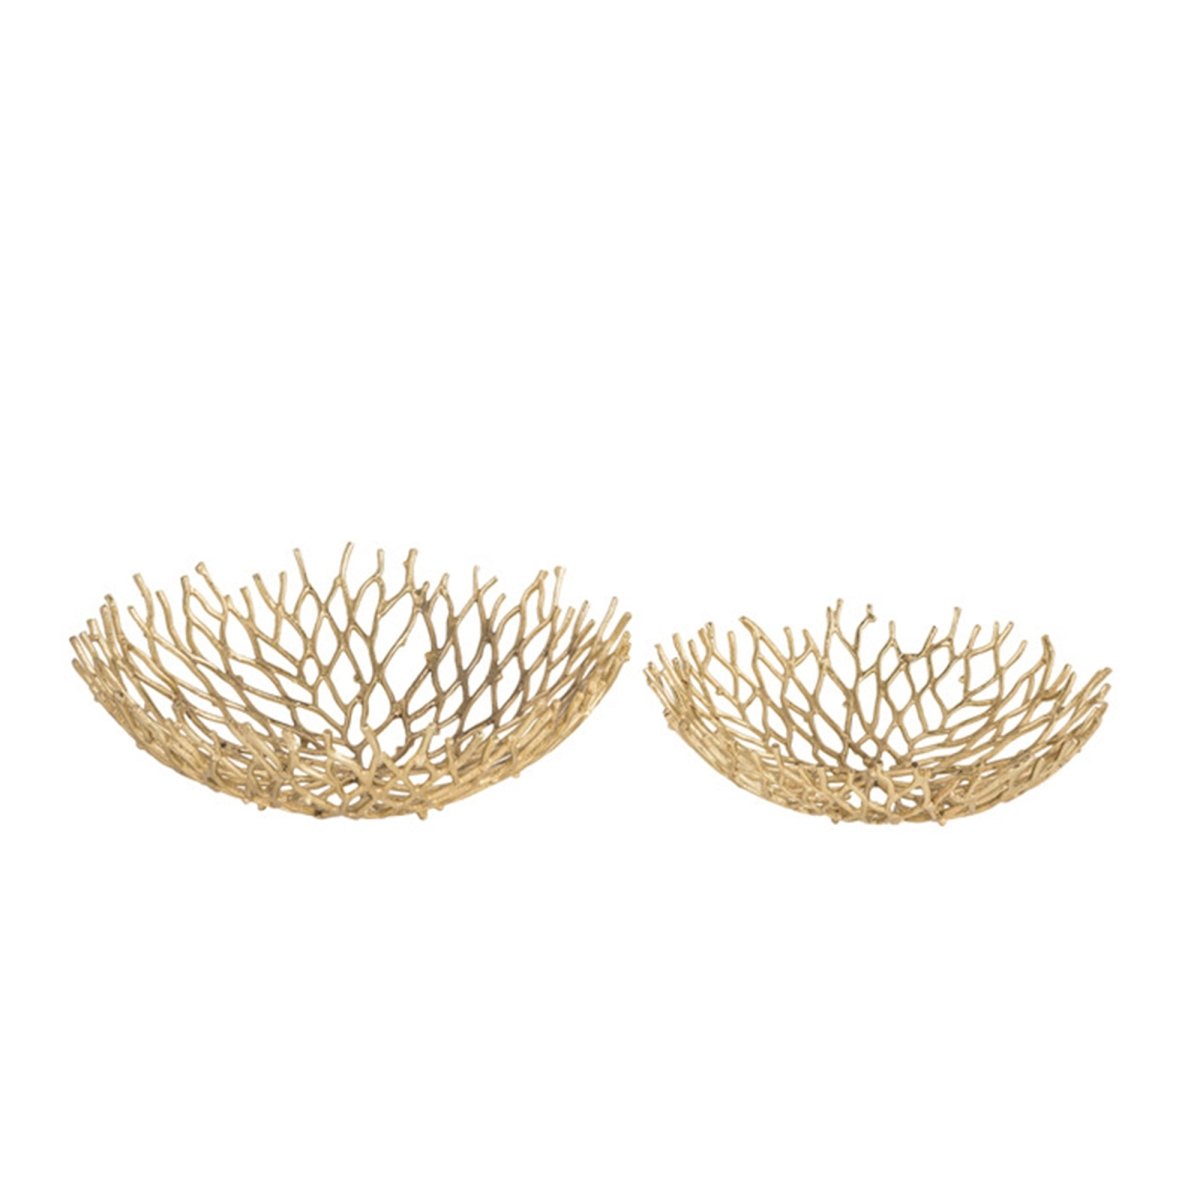 lily & onyx Gold Aluminum Branch Bowls, Set of 2 - lily & onyx